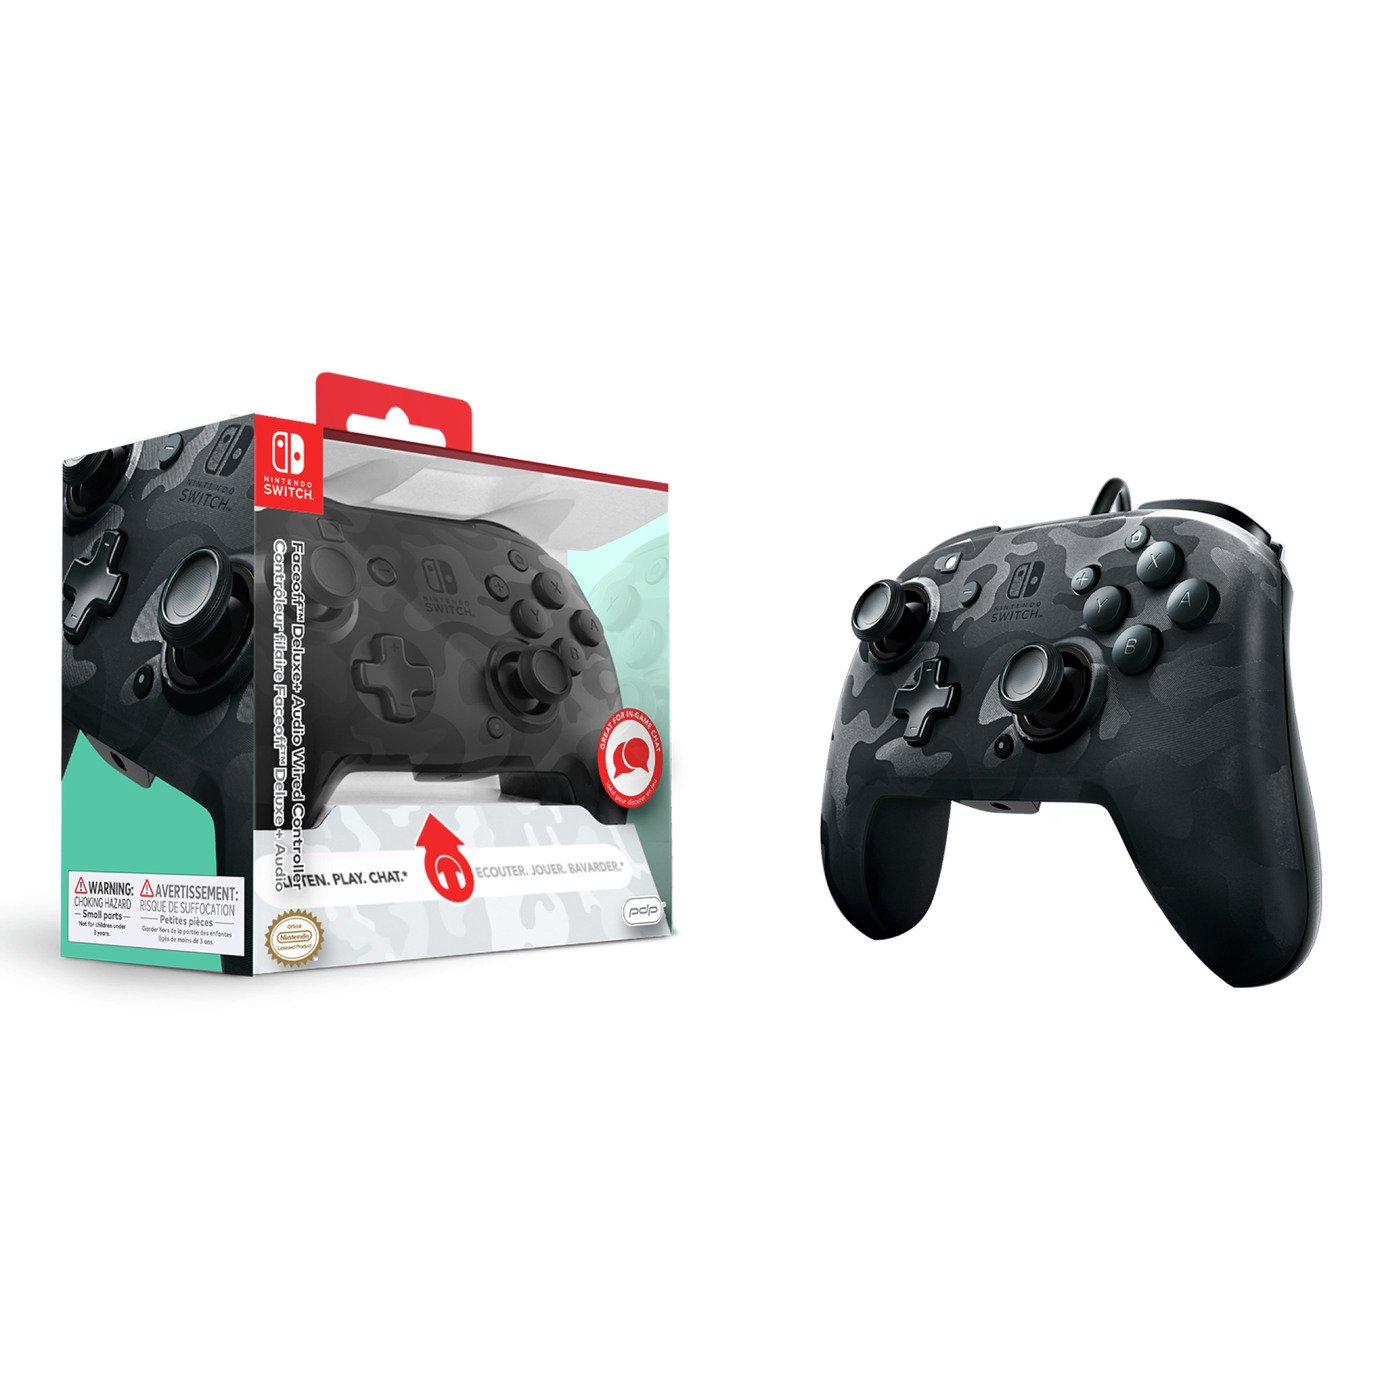 PDP Official Licensed Nintendo Switch Wired Controller Black Review